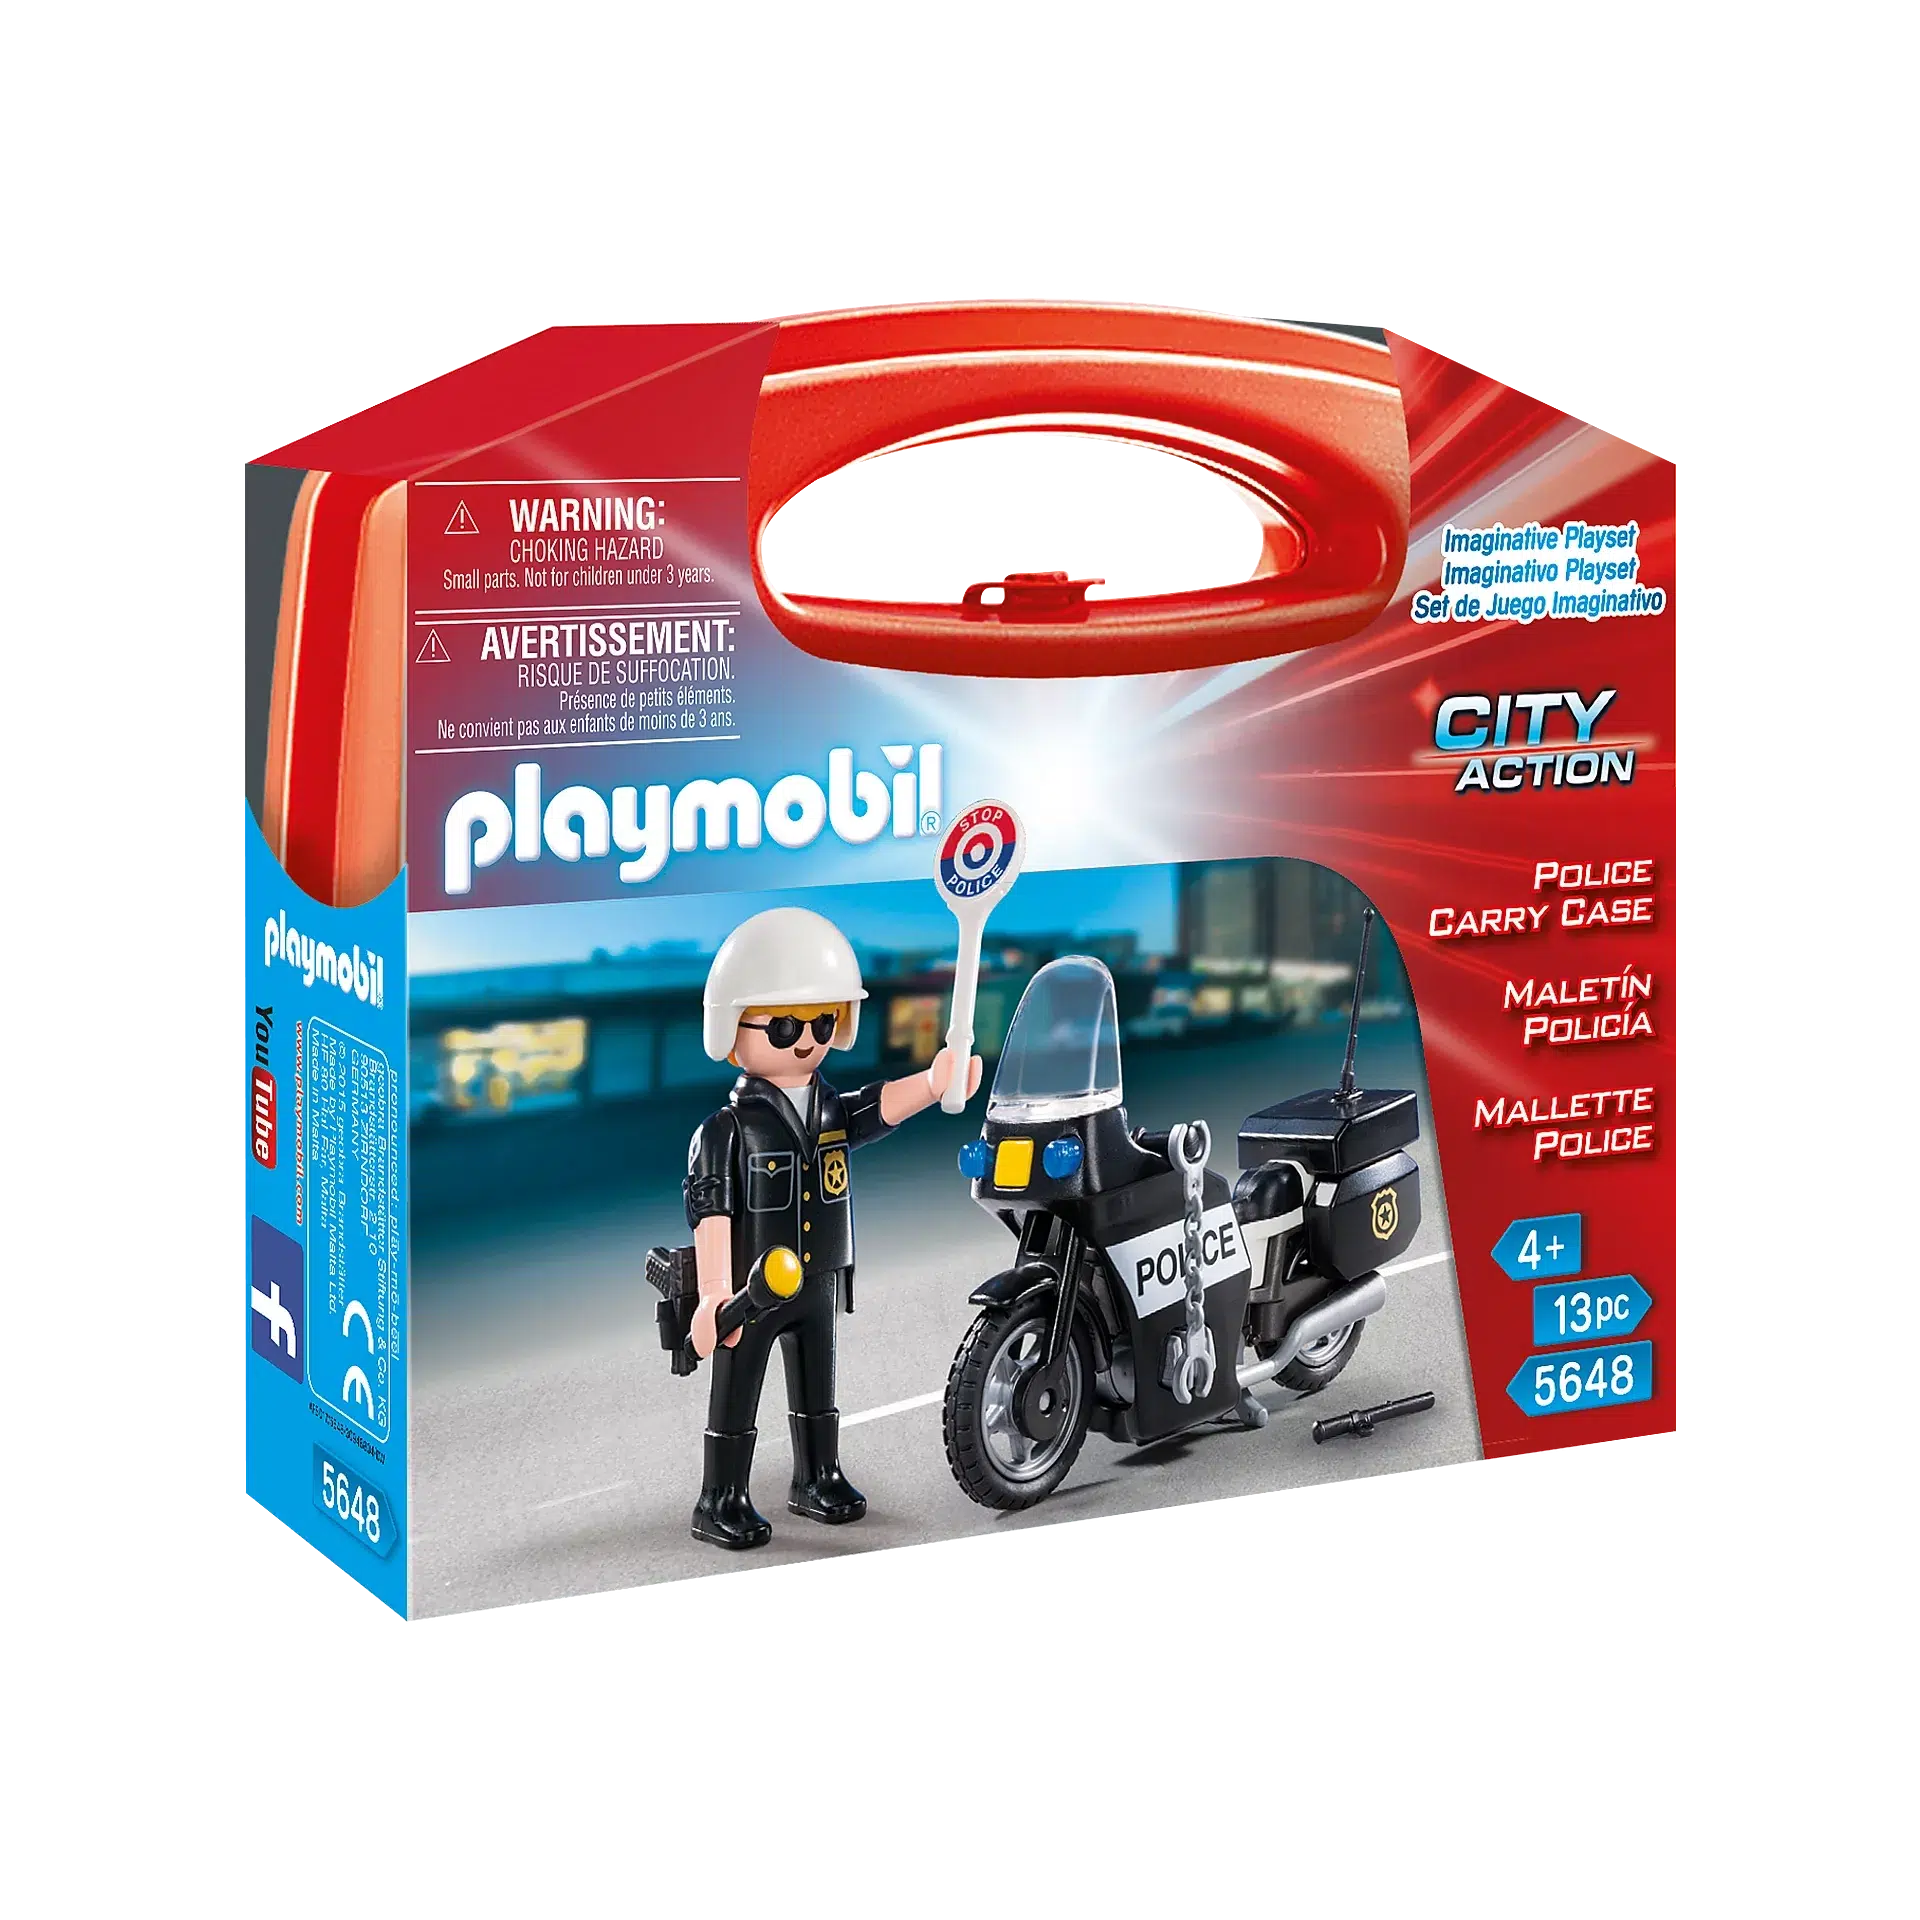 Playmobil-City Action - Police Carry Case-5648-Legacy Toys